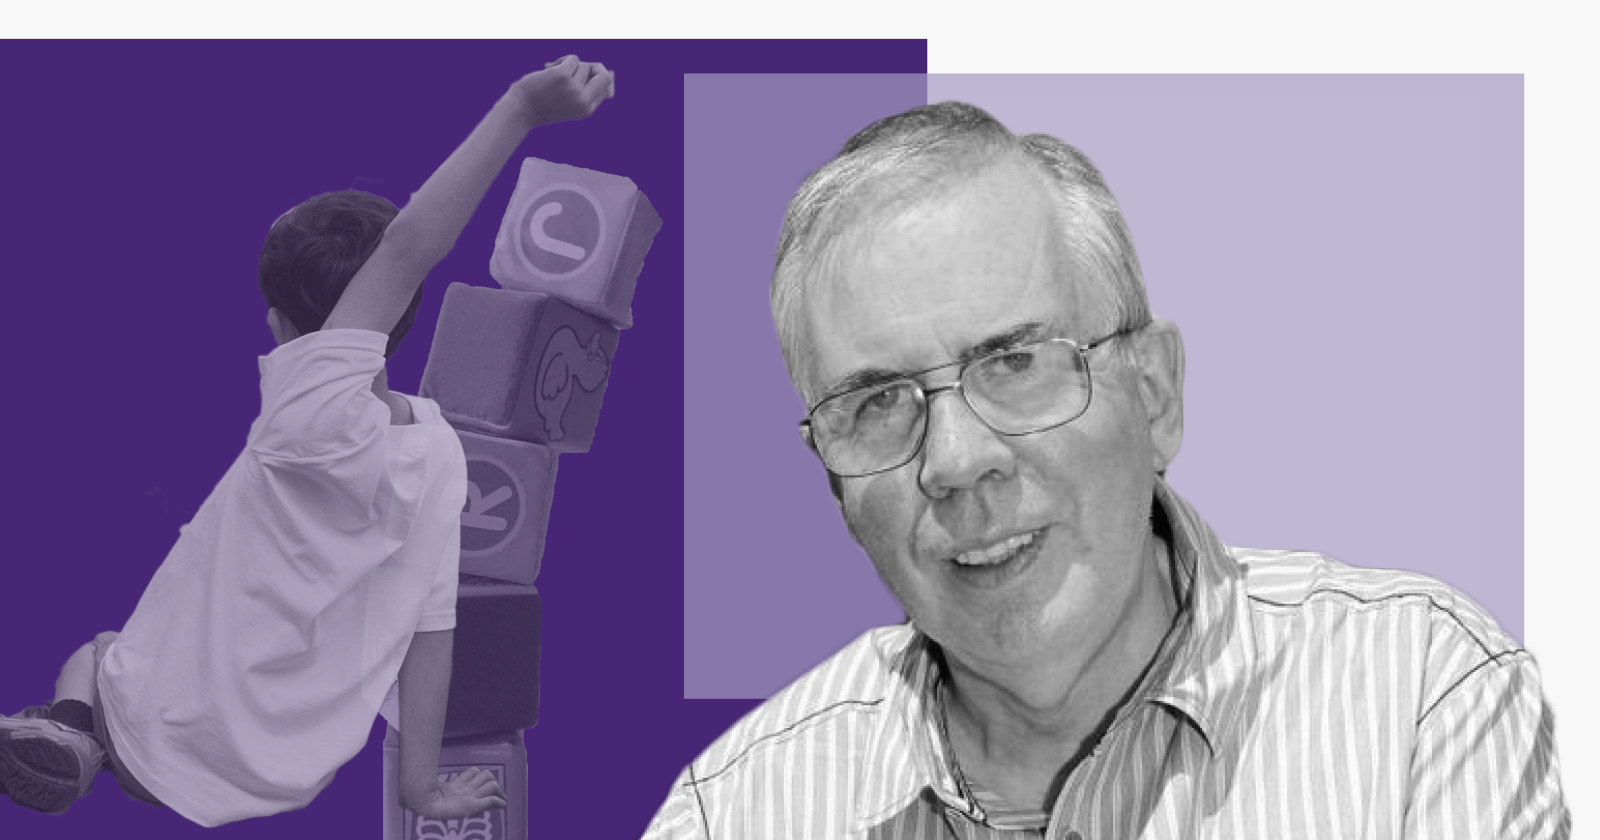 Education Consultant and Chair of Reform Scotland's Commission on School Reform, Keir Bloomer on a purple background with a child and building blocks